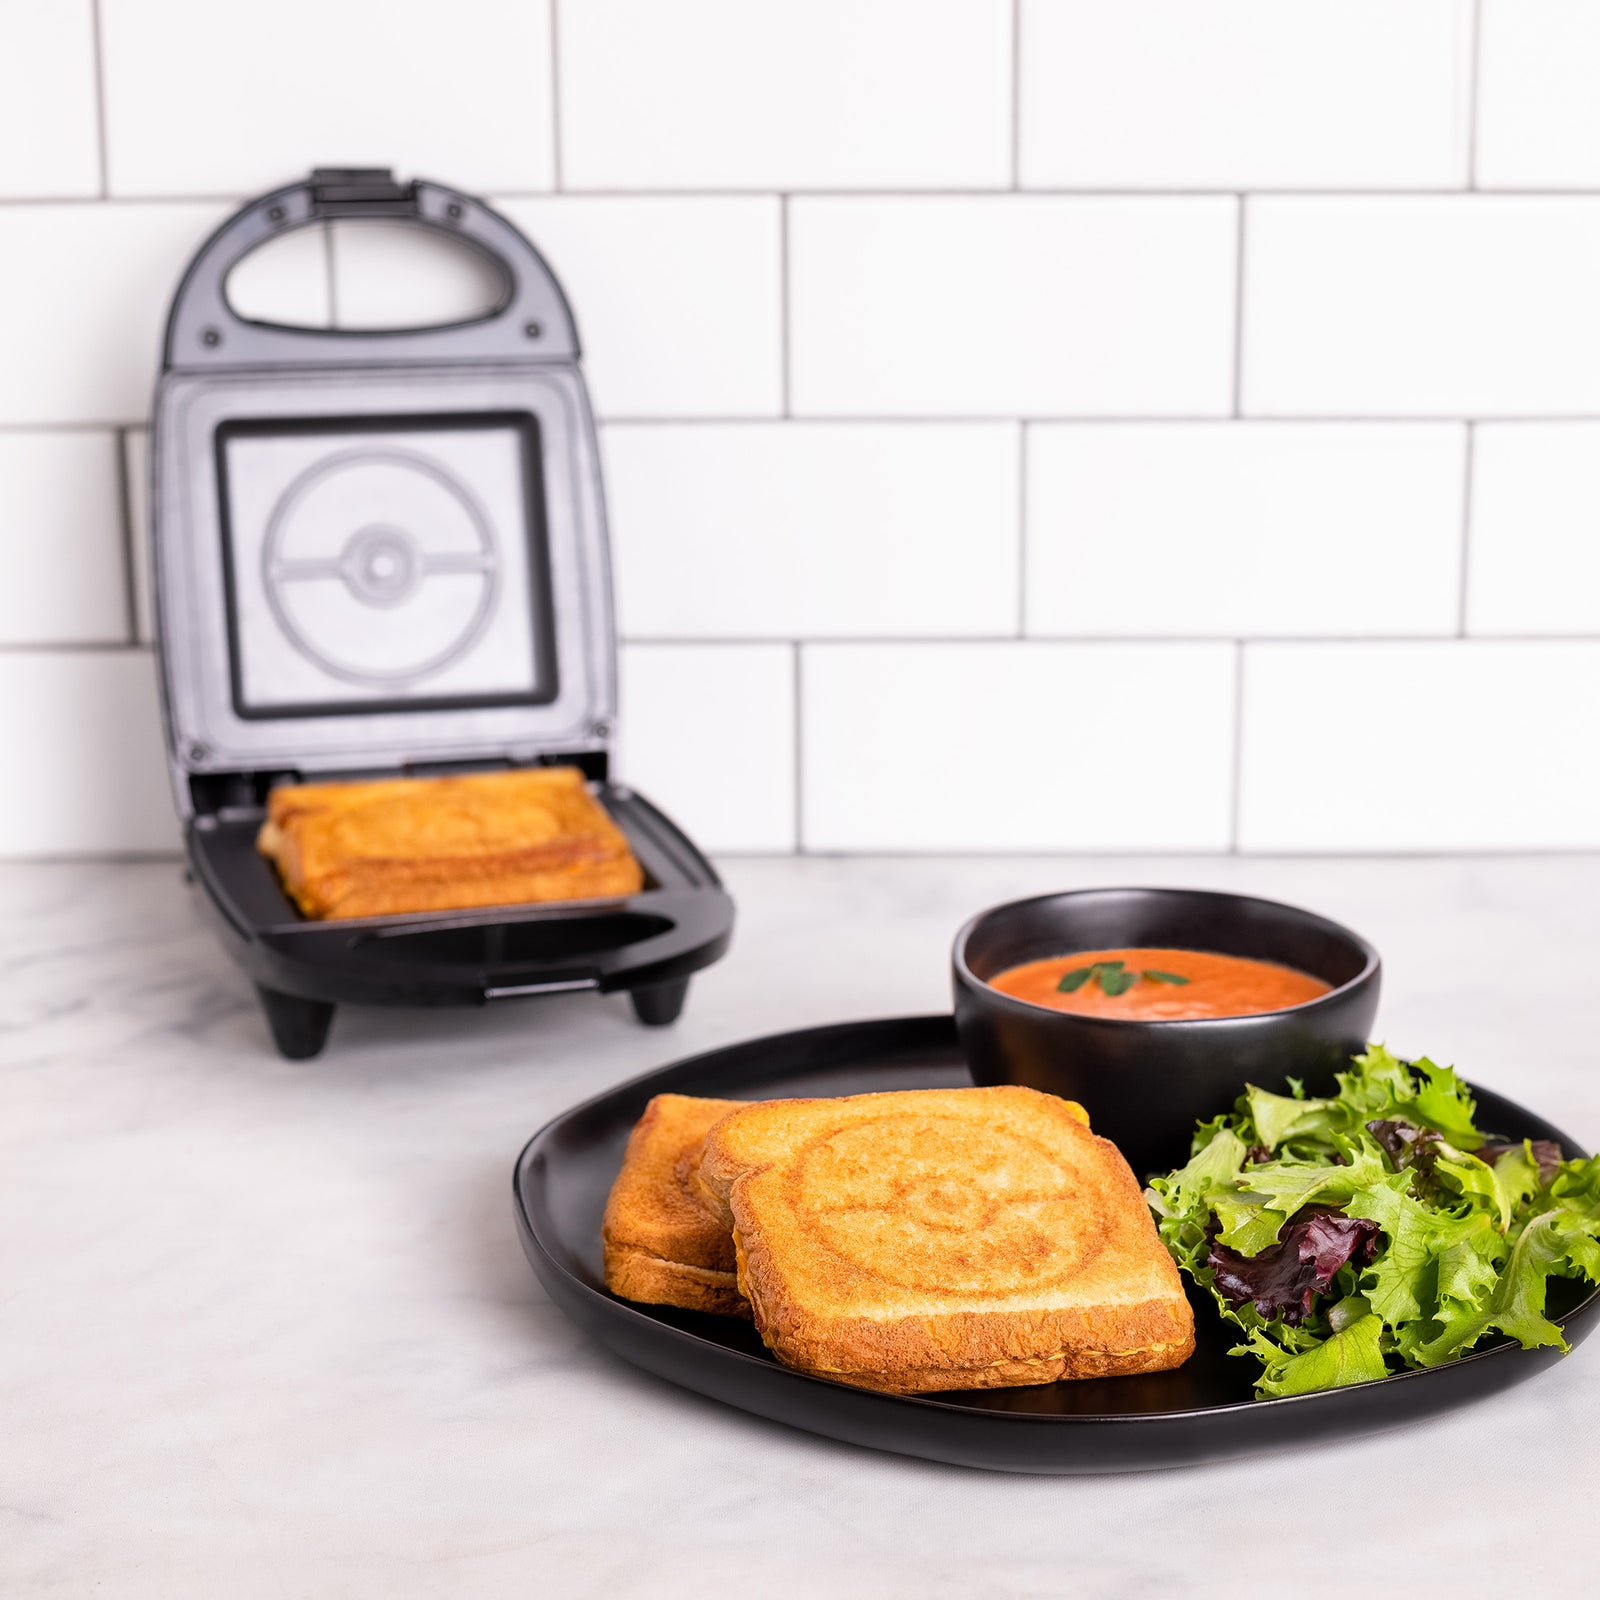 Uncanny Brands Red 900W Jurassic Park Grilled Grilled Cheese Sandwich Maker  PP-JUR-JP - The Home Depot